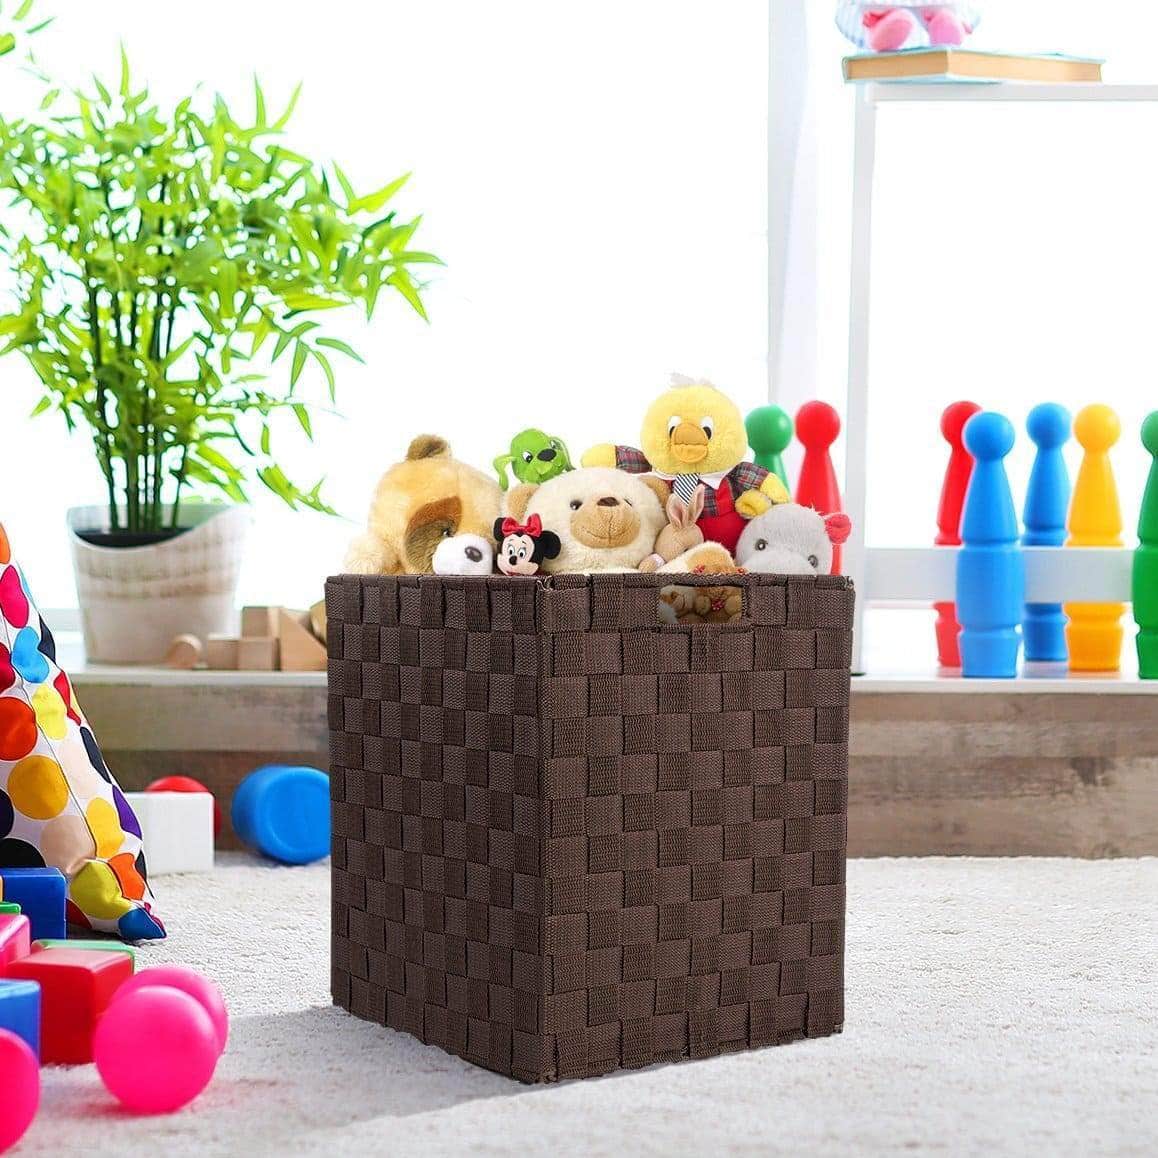 Shop here sorbus foldable storage cube woven basket bin set built in carry handles great for home organization nursery playroom closet dorm etc woven basket bin cubes 2 pack chocolate